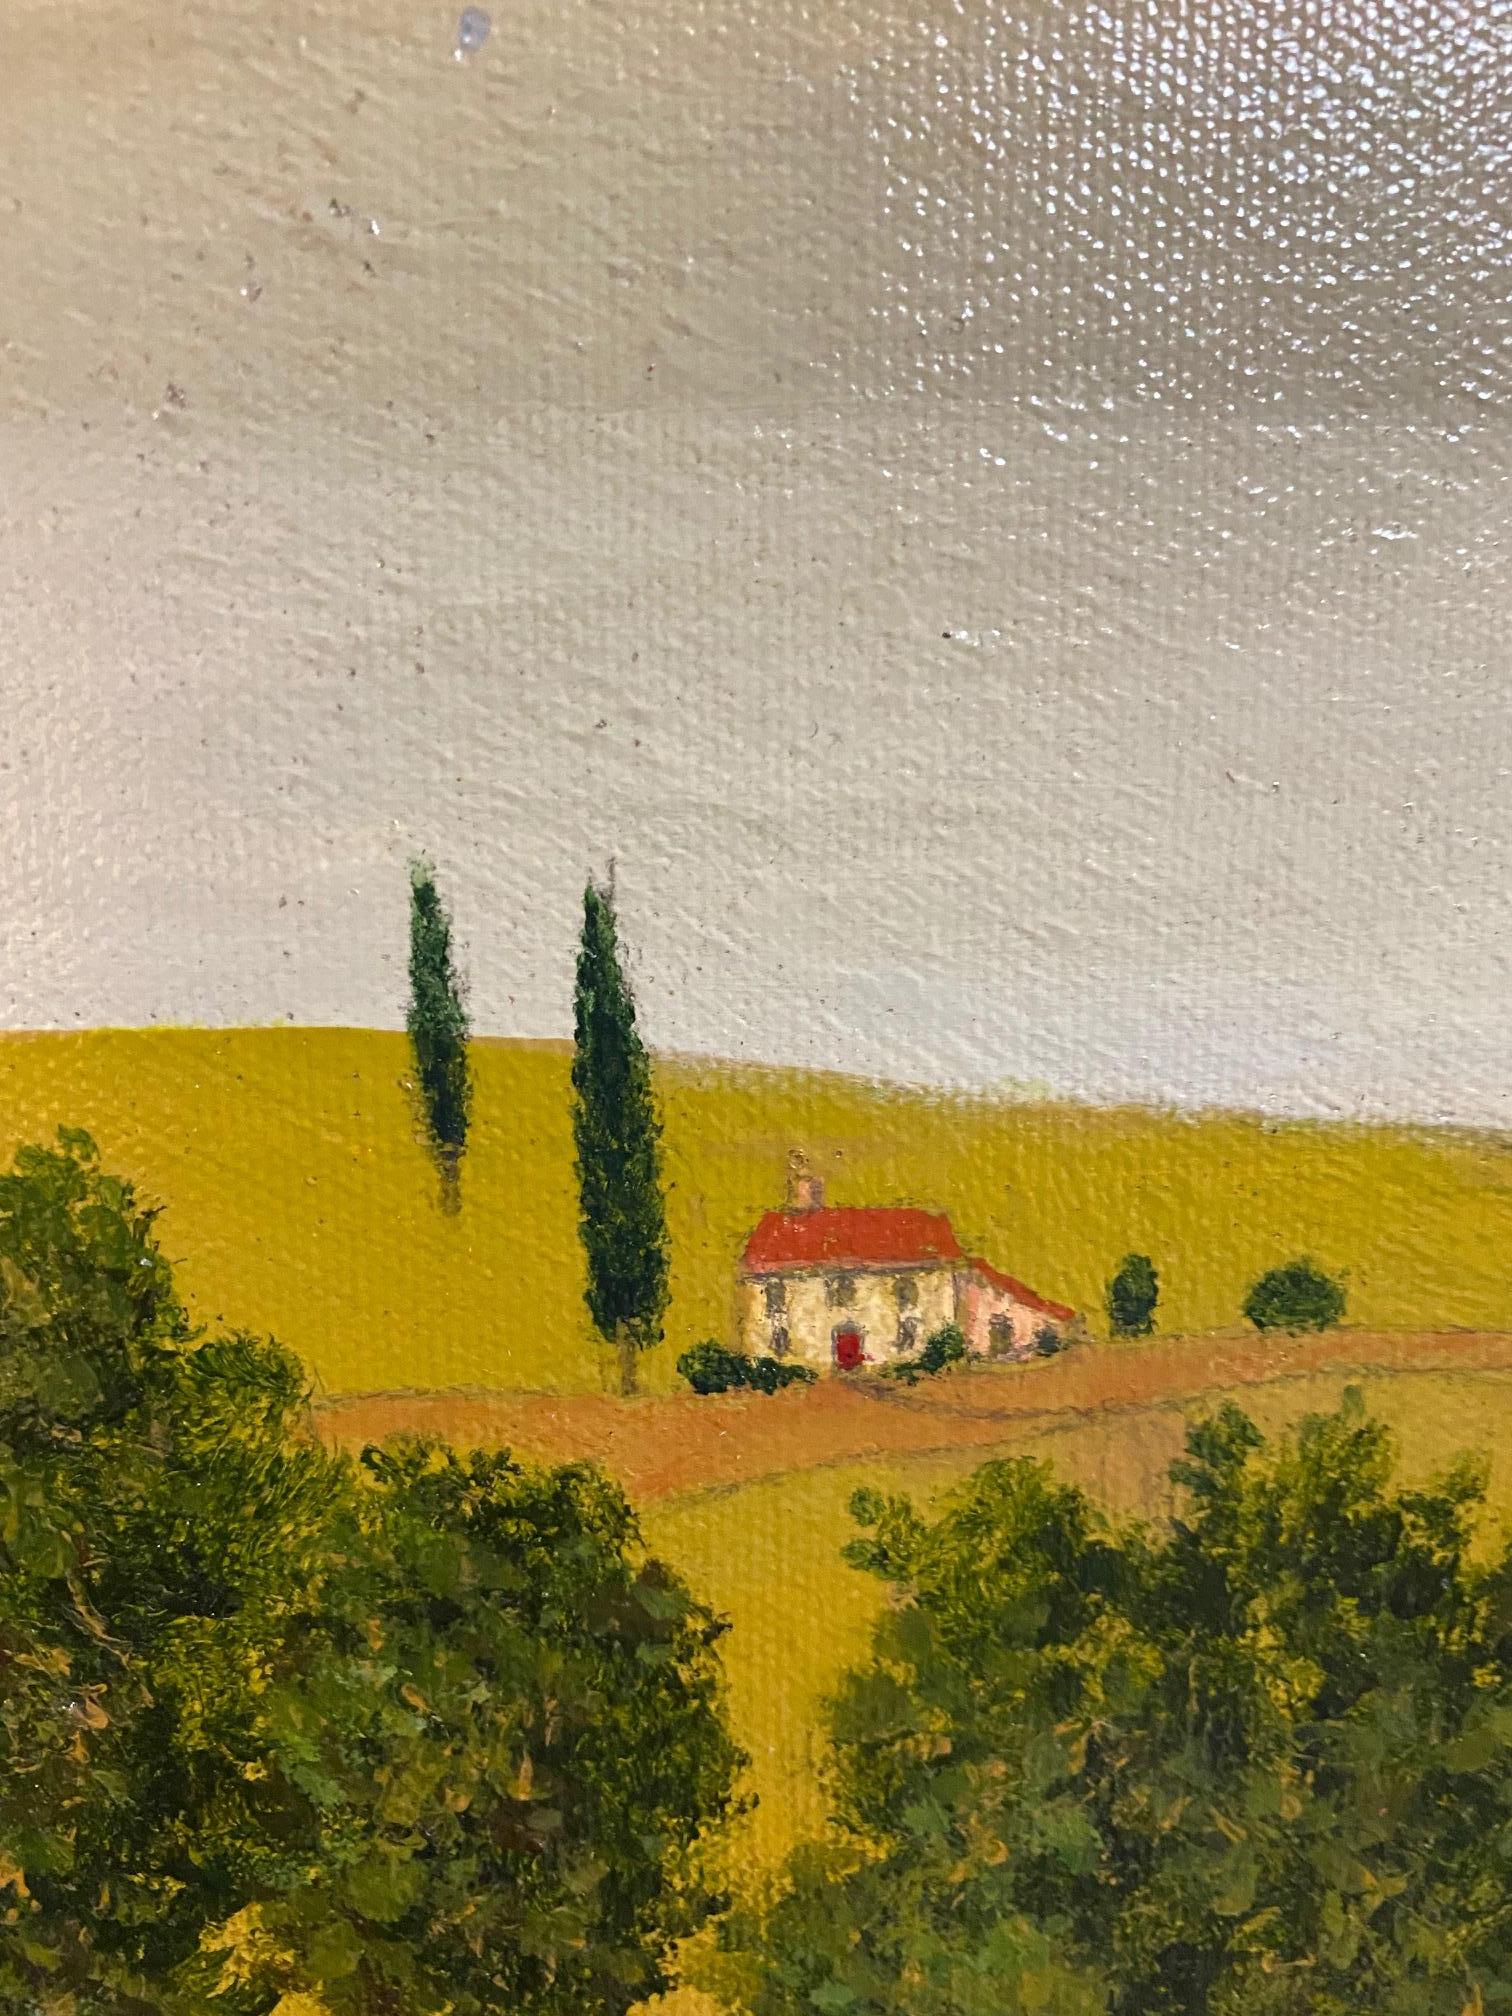 With a mixture of oil and acrylic paints plus 40 years of experience, artist Patrick Antonelle evokes generations of the sublime rural dreamland that is the Tuscan Hills in this original contemporary Italian landscape! Walking through the green,